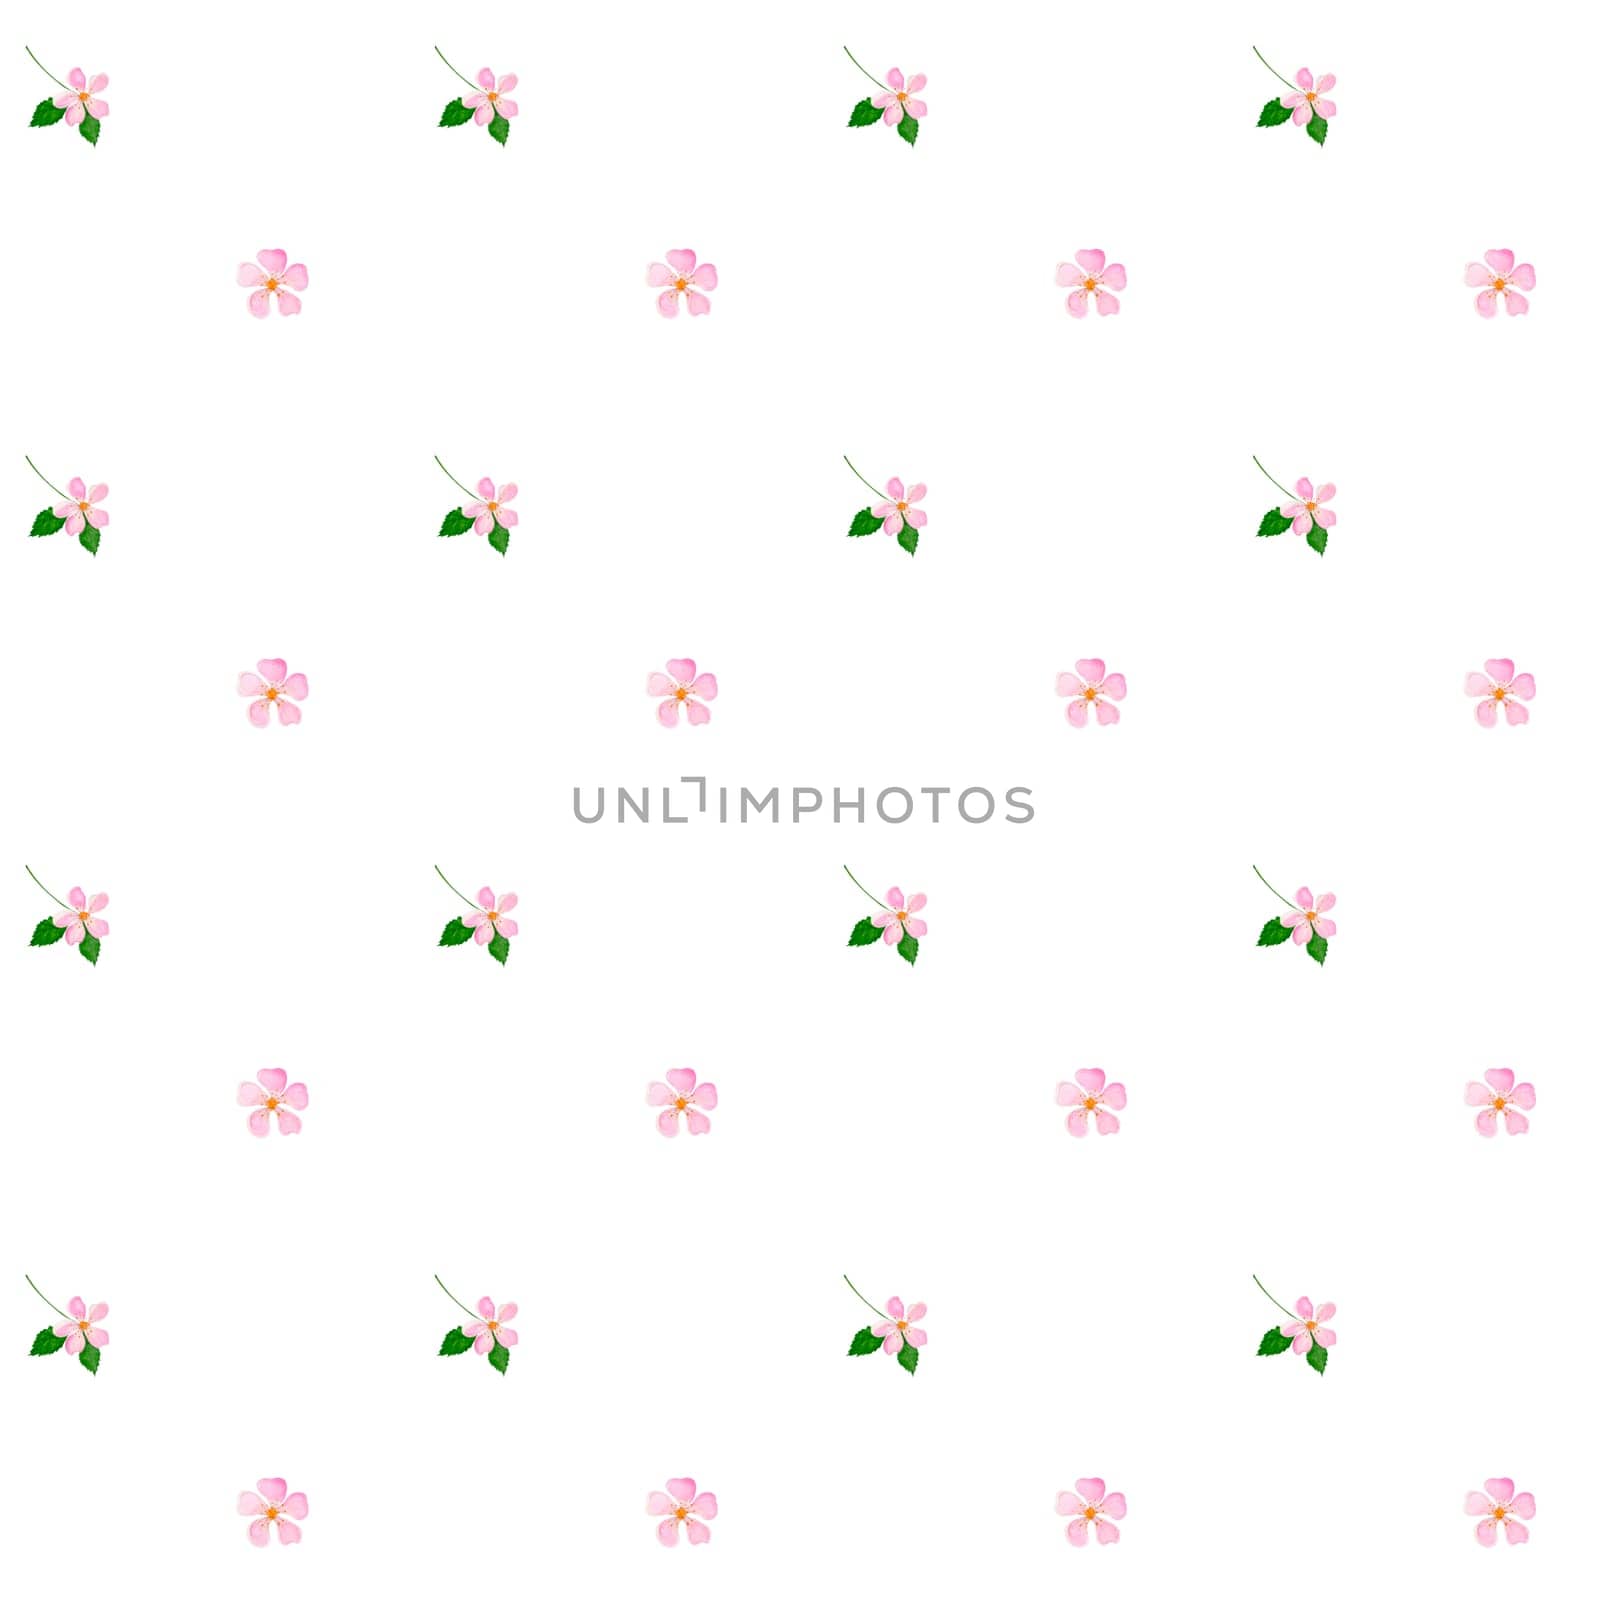 Watercolor floral pattern. Seamless illustration of pink blossoms on a white background. Delicate minimalistic design. For printing on textiles and cosmetics packaging. High quality photo